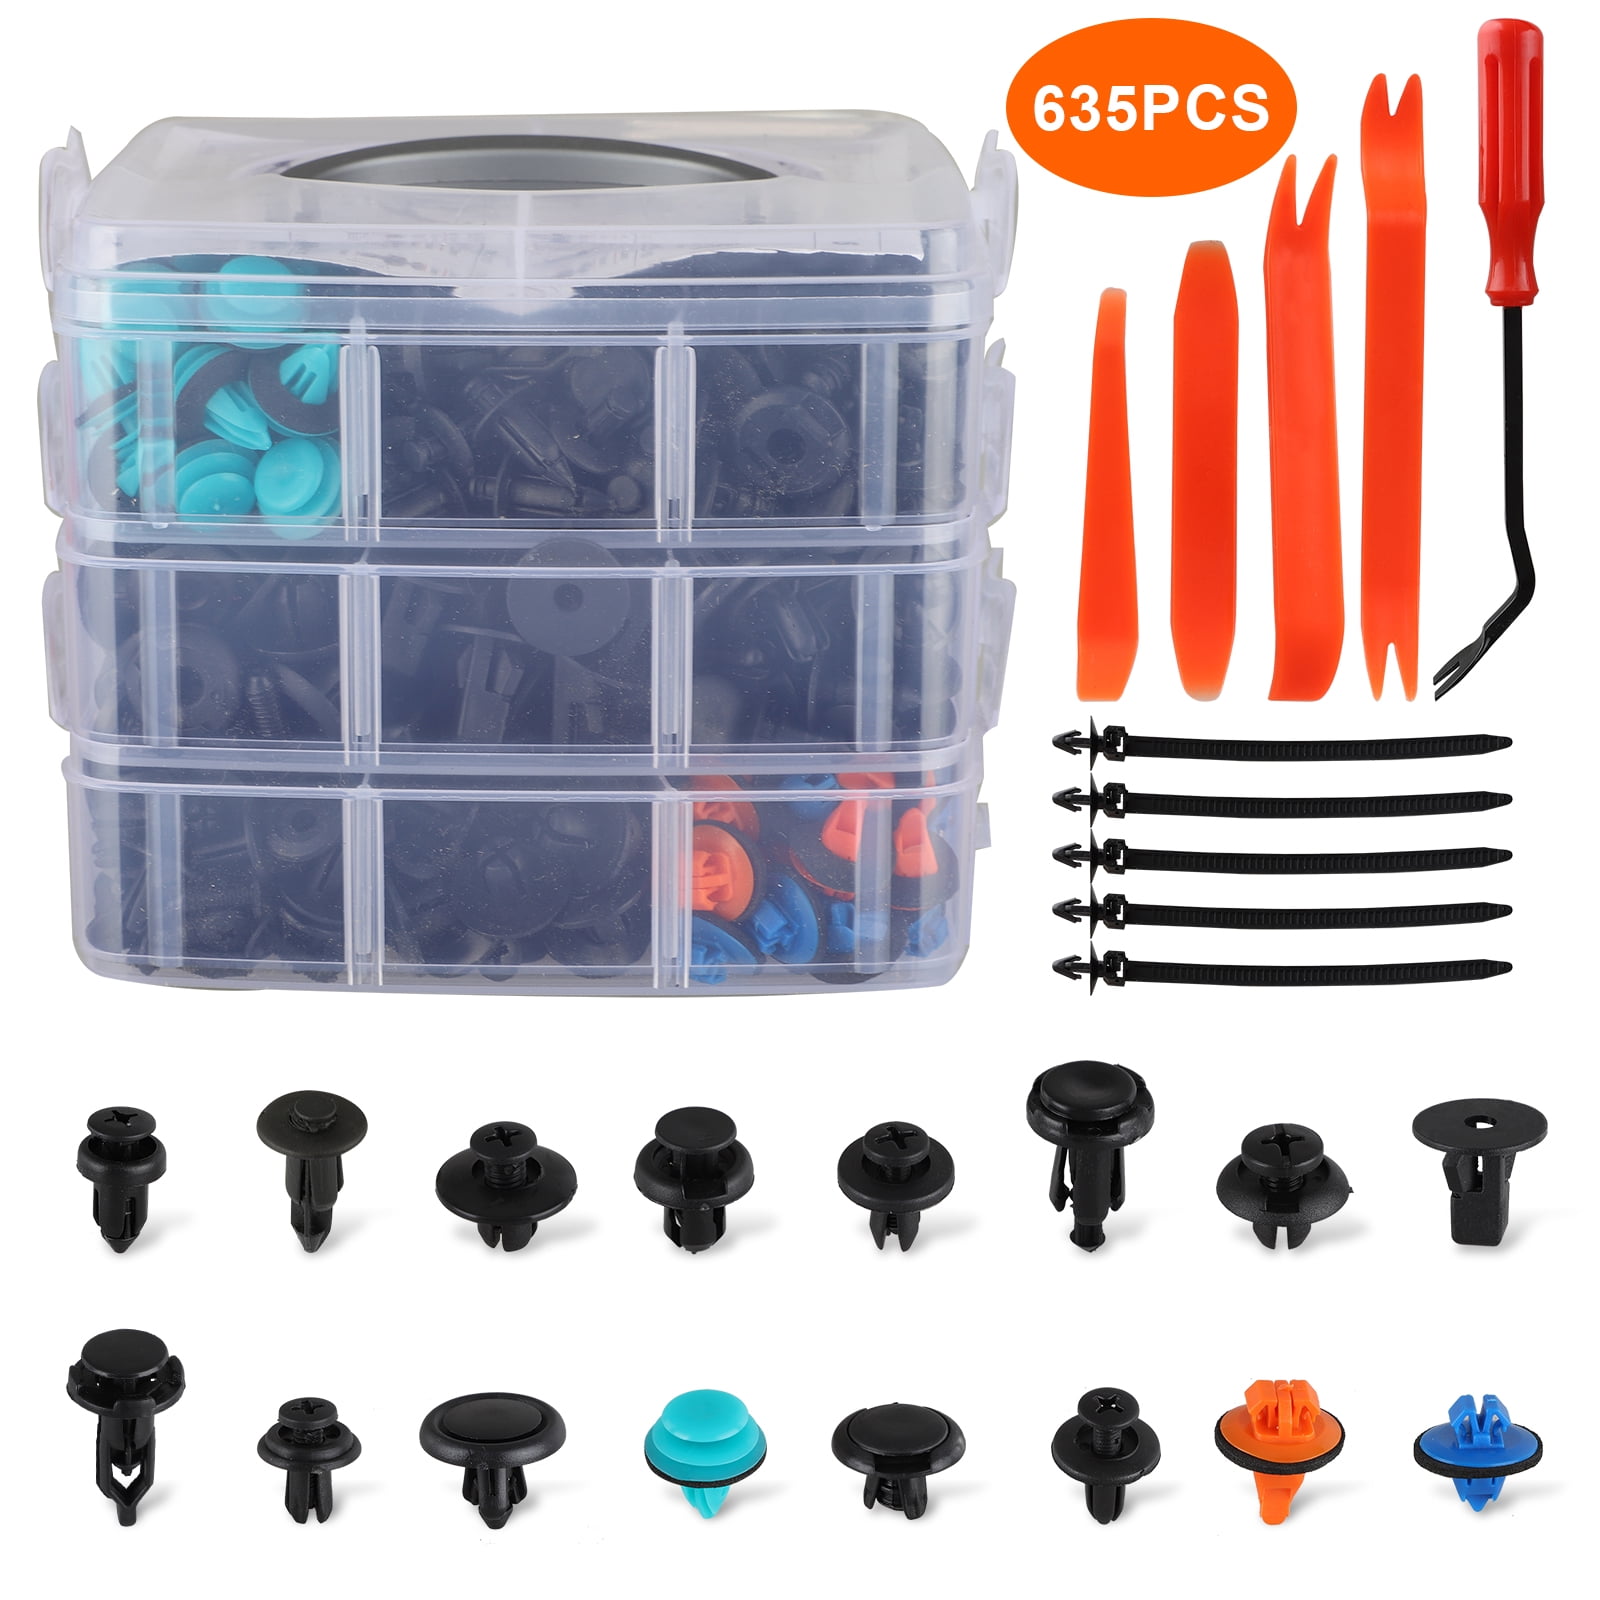 Yhomie 465 Pcs Professional Car Retainer Clips Plastic Fasteners Kit with Fastener Remover,Car Door Panel Lining,Bumper,Snap Door Panel,Snap Clip 